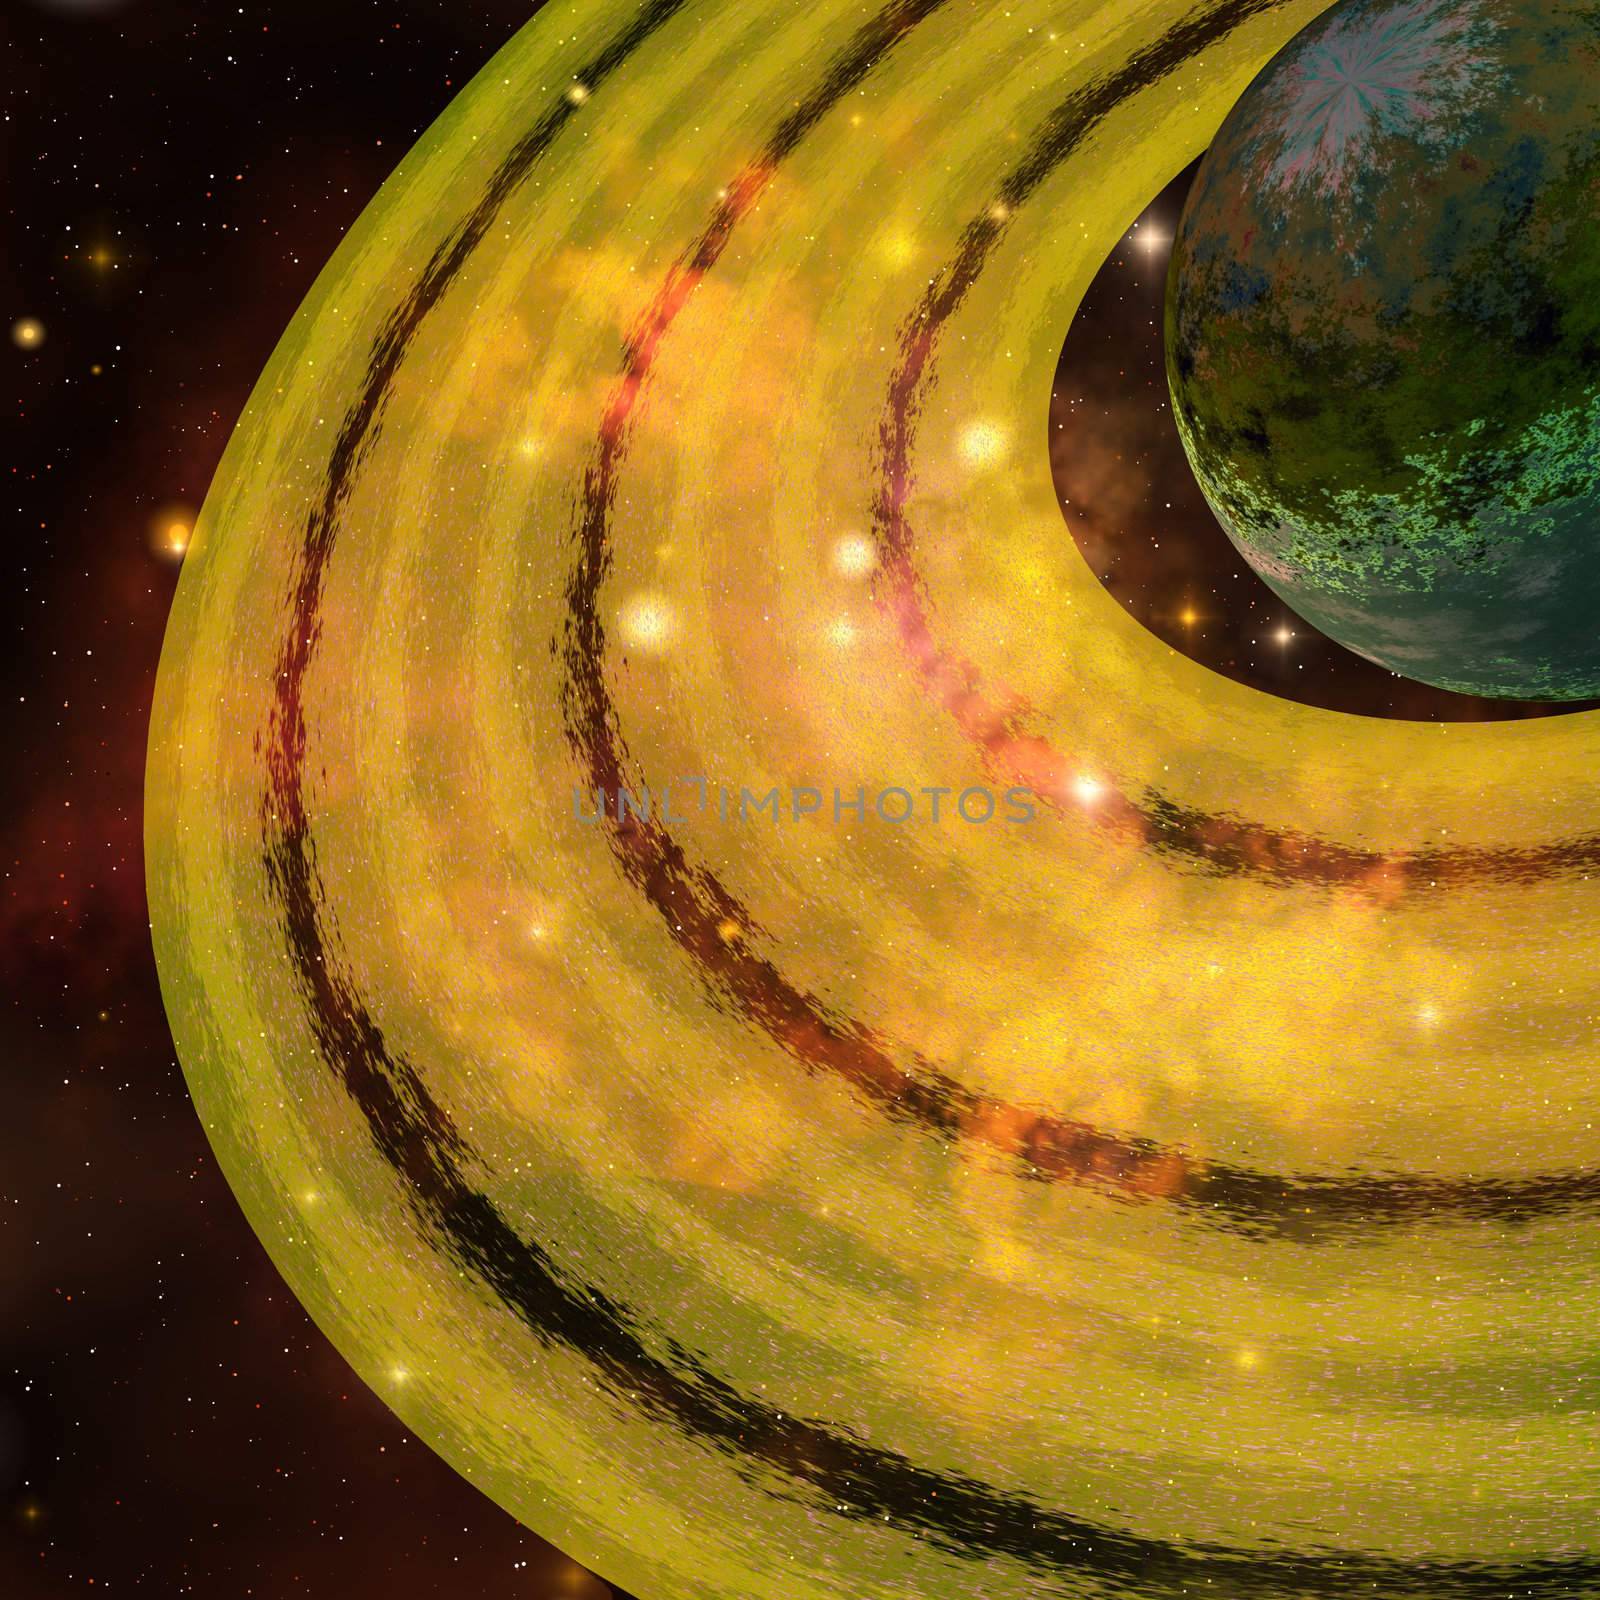 A golden ring system encircles this planet out in the galaxy.